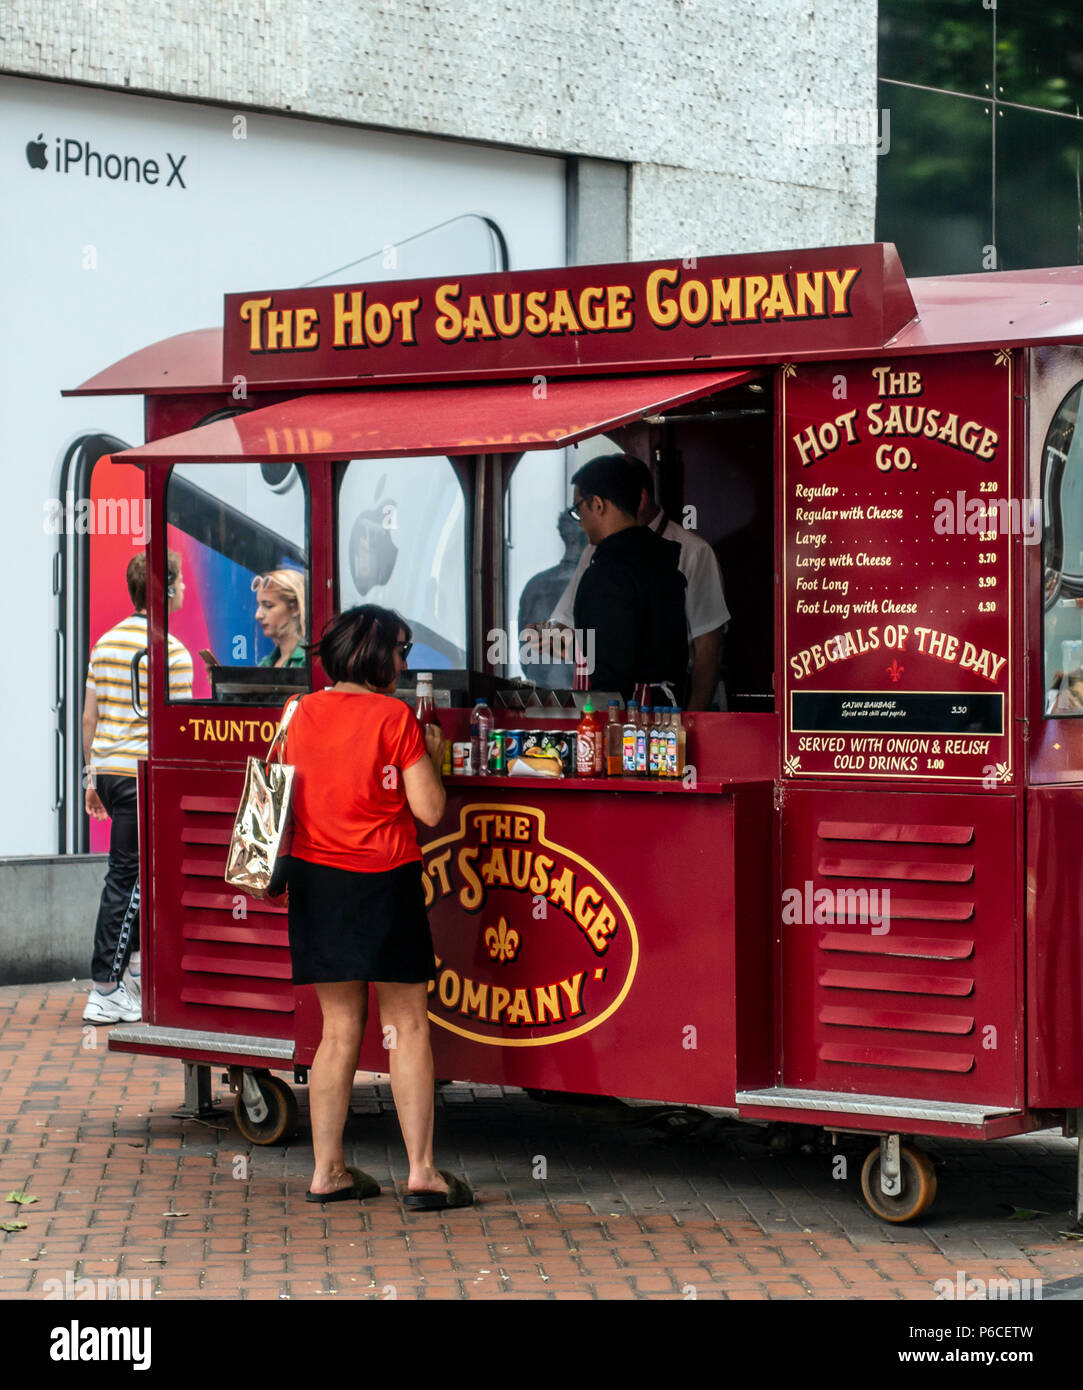 Customer at The Hot Sausage Company fast food stall (tramcar) in  photo